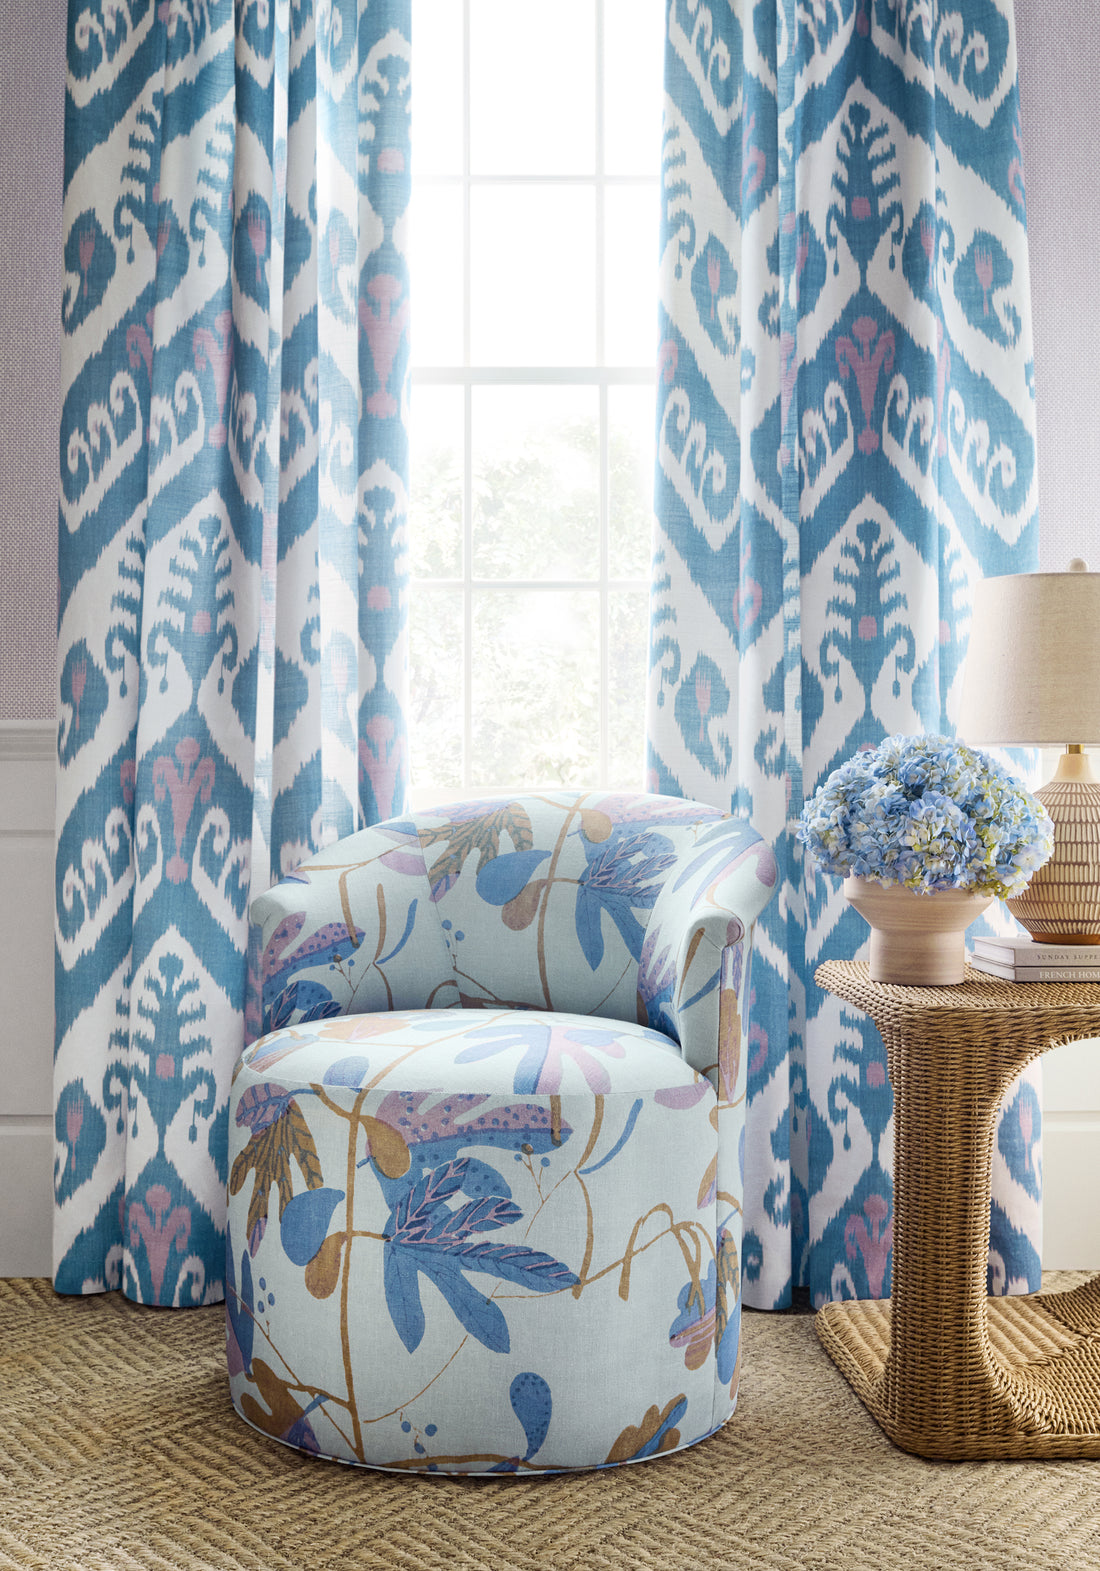 Draperies made from Indies Ikat fabric in lavender and french blue color - pattern number F916249 - by Thibaut fabric in the Kismet collection